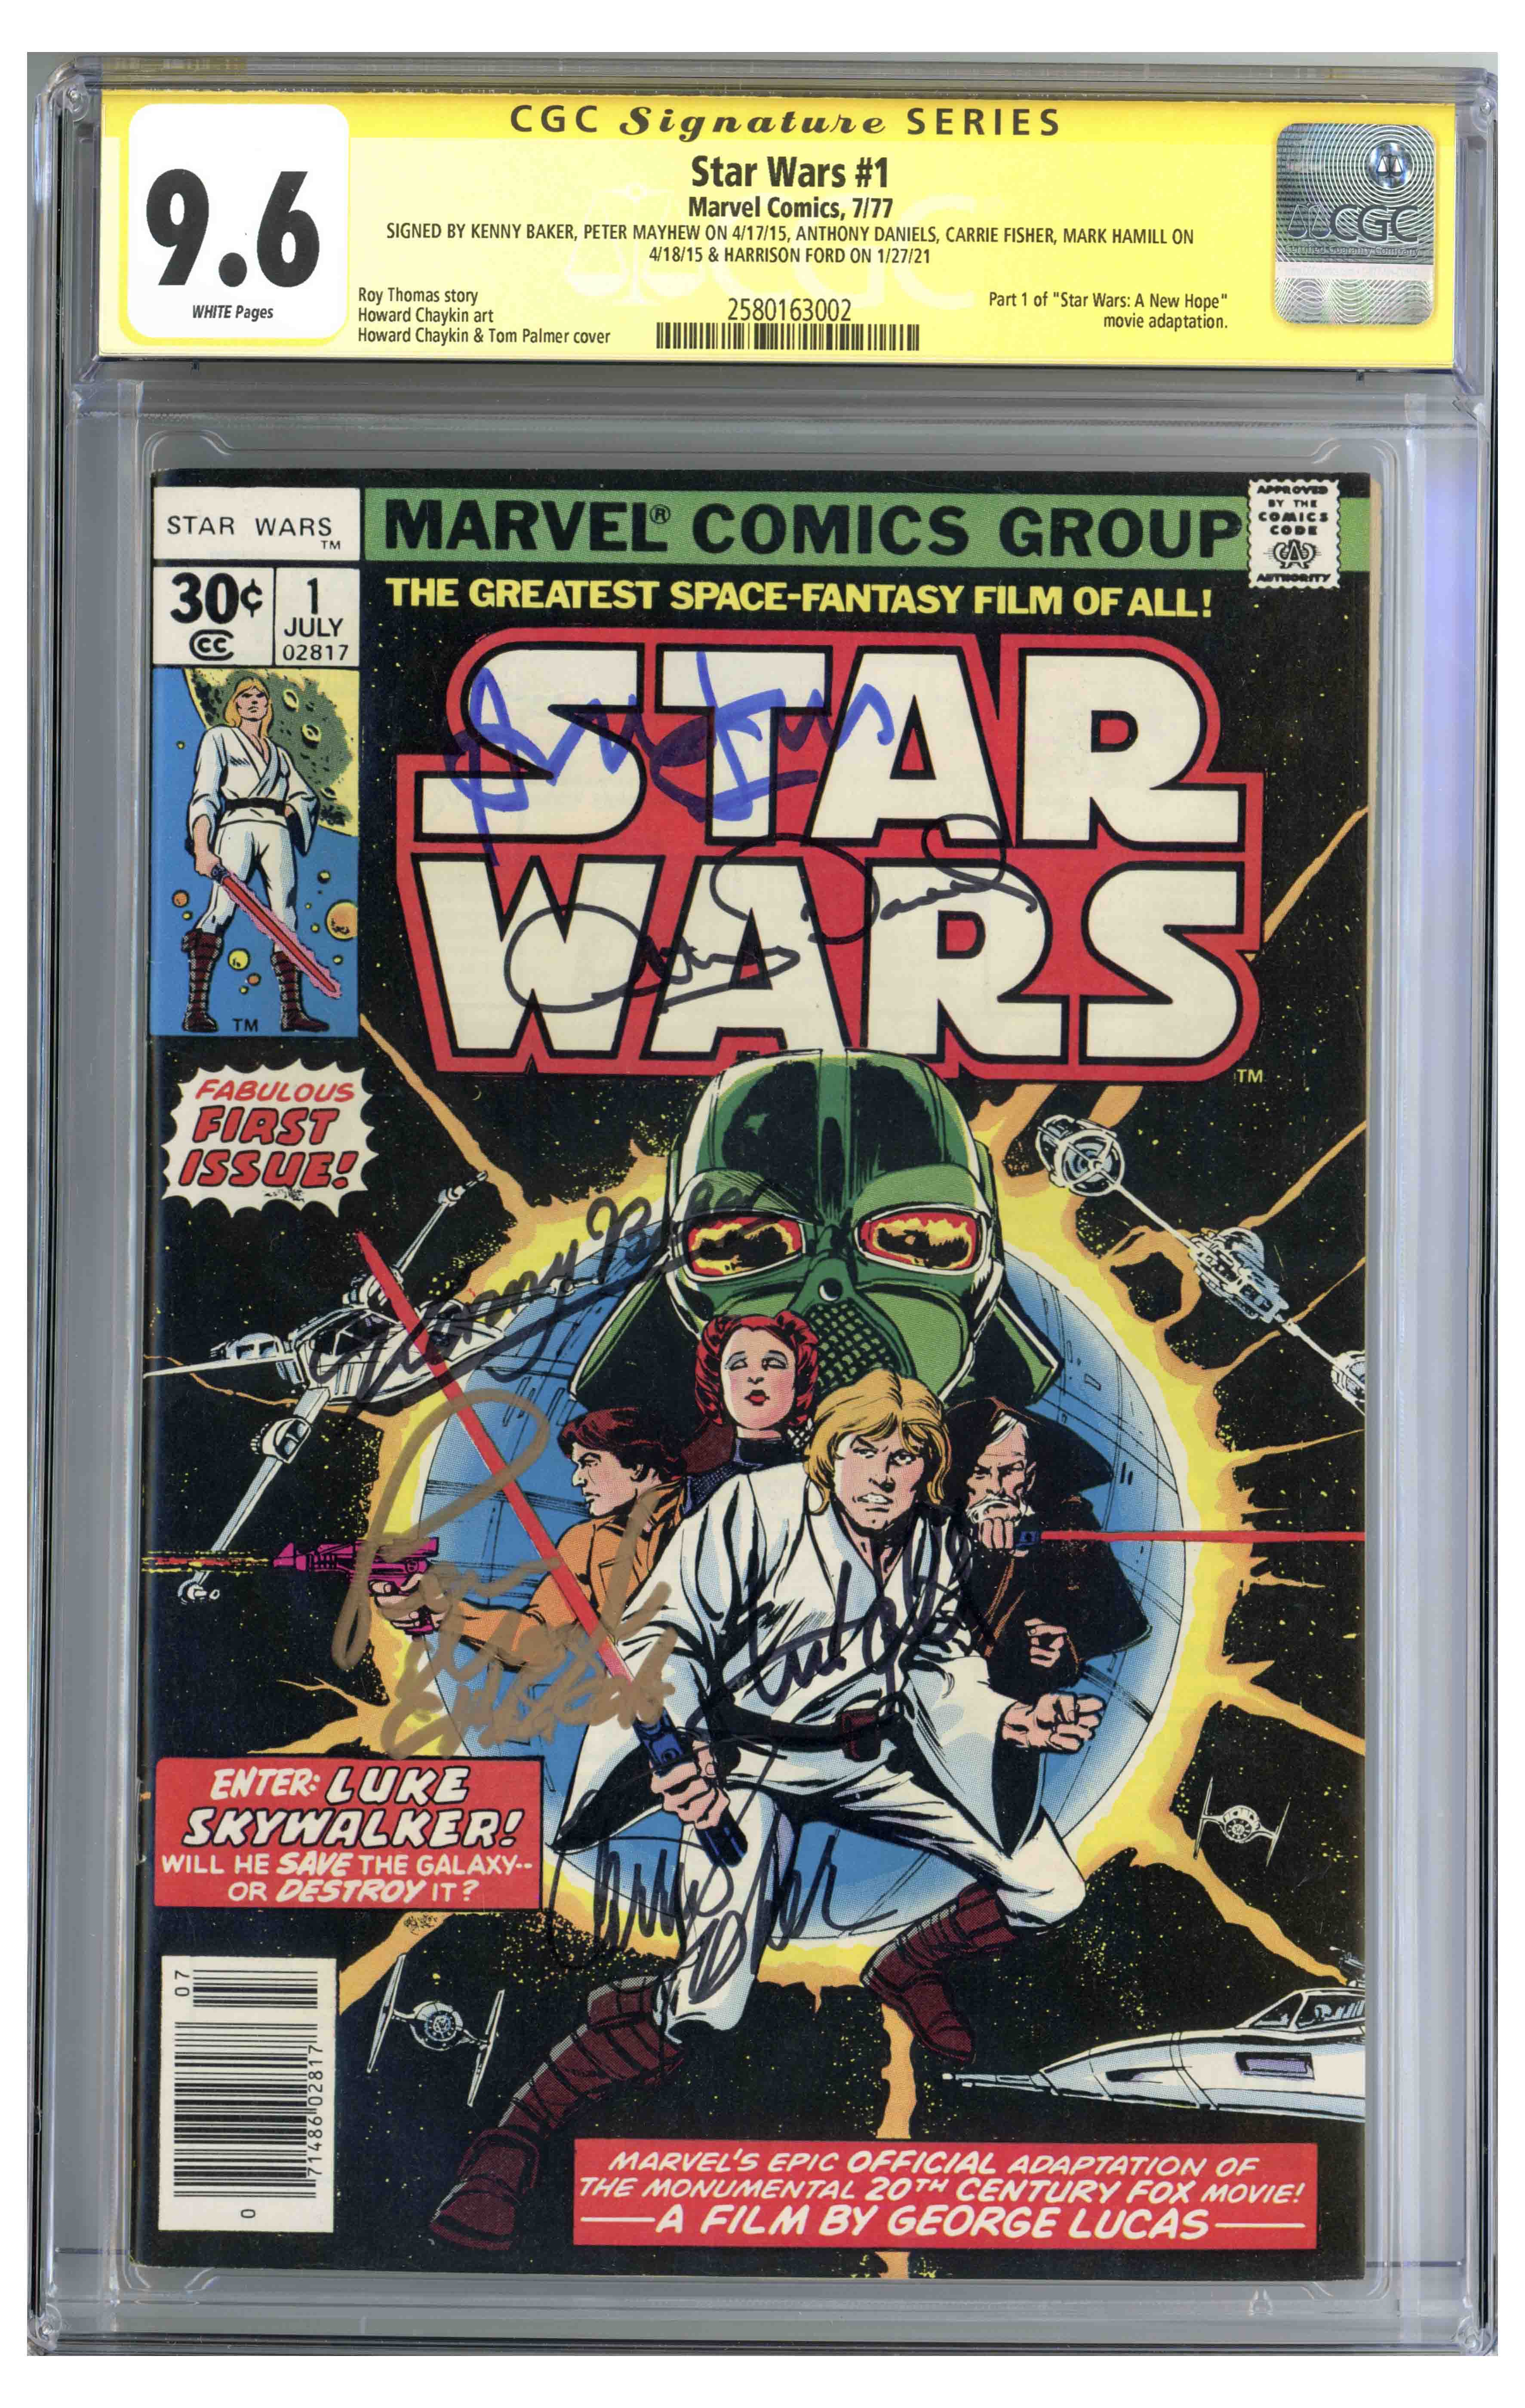 ”star wars #1” comic book signed by mark hamill, carrie fisher, harrison ford to be auctioned